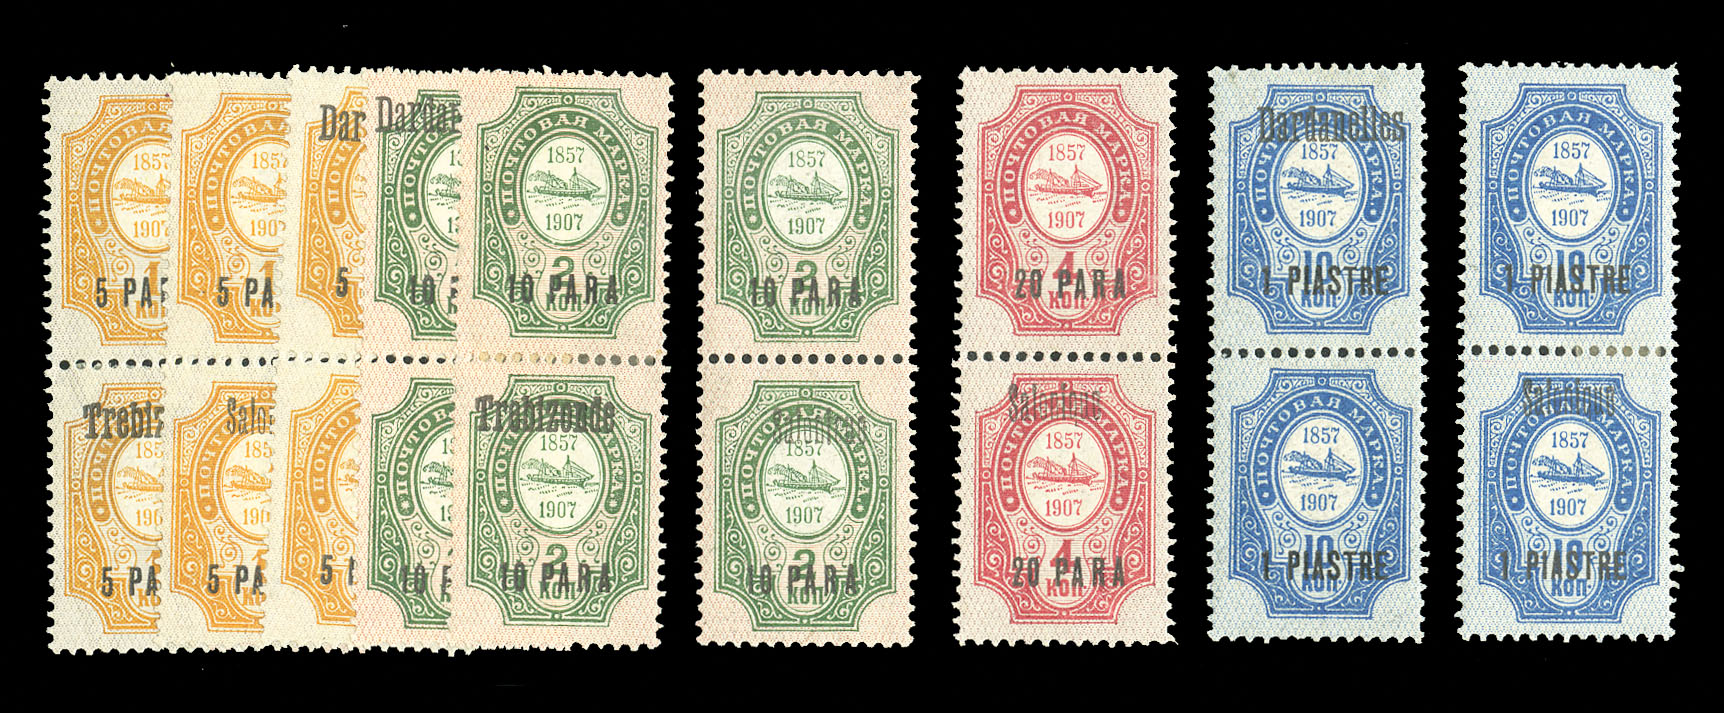 Lot 1250 - RUSSIA  Ship Mail  -  Cherrystone Auctions U.S. & Worldwide Stamps & Postal History